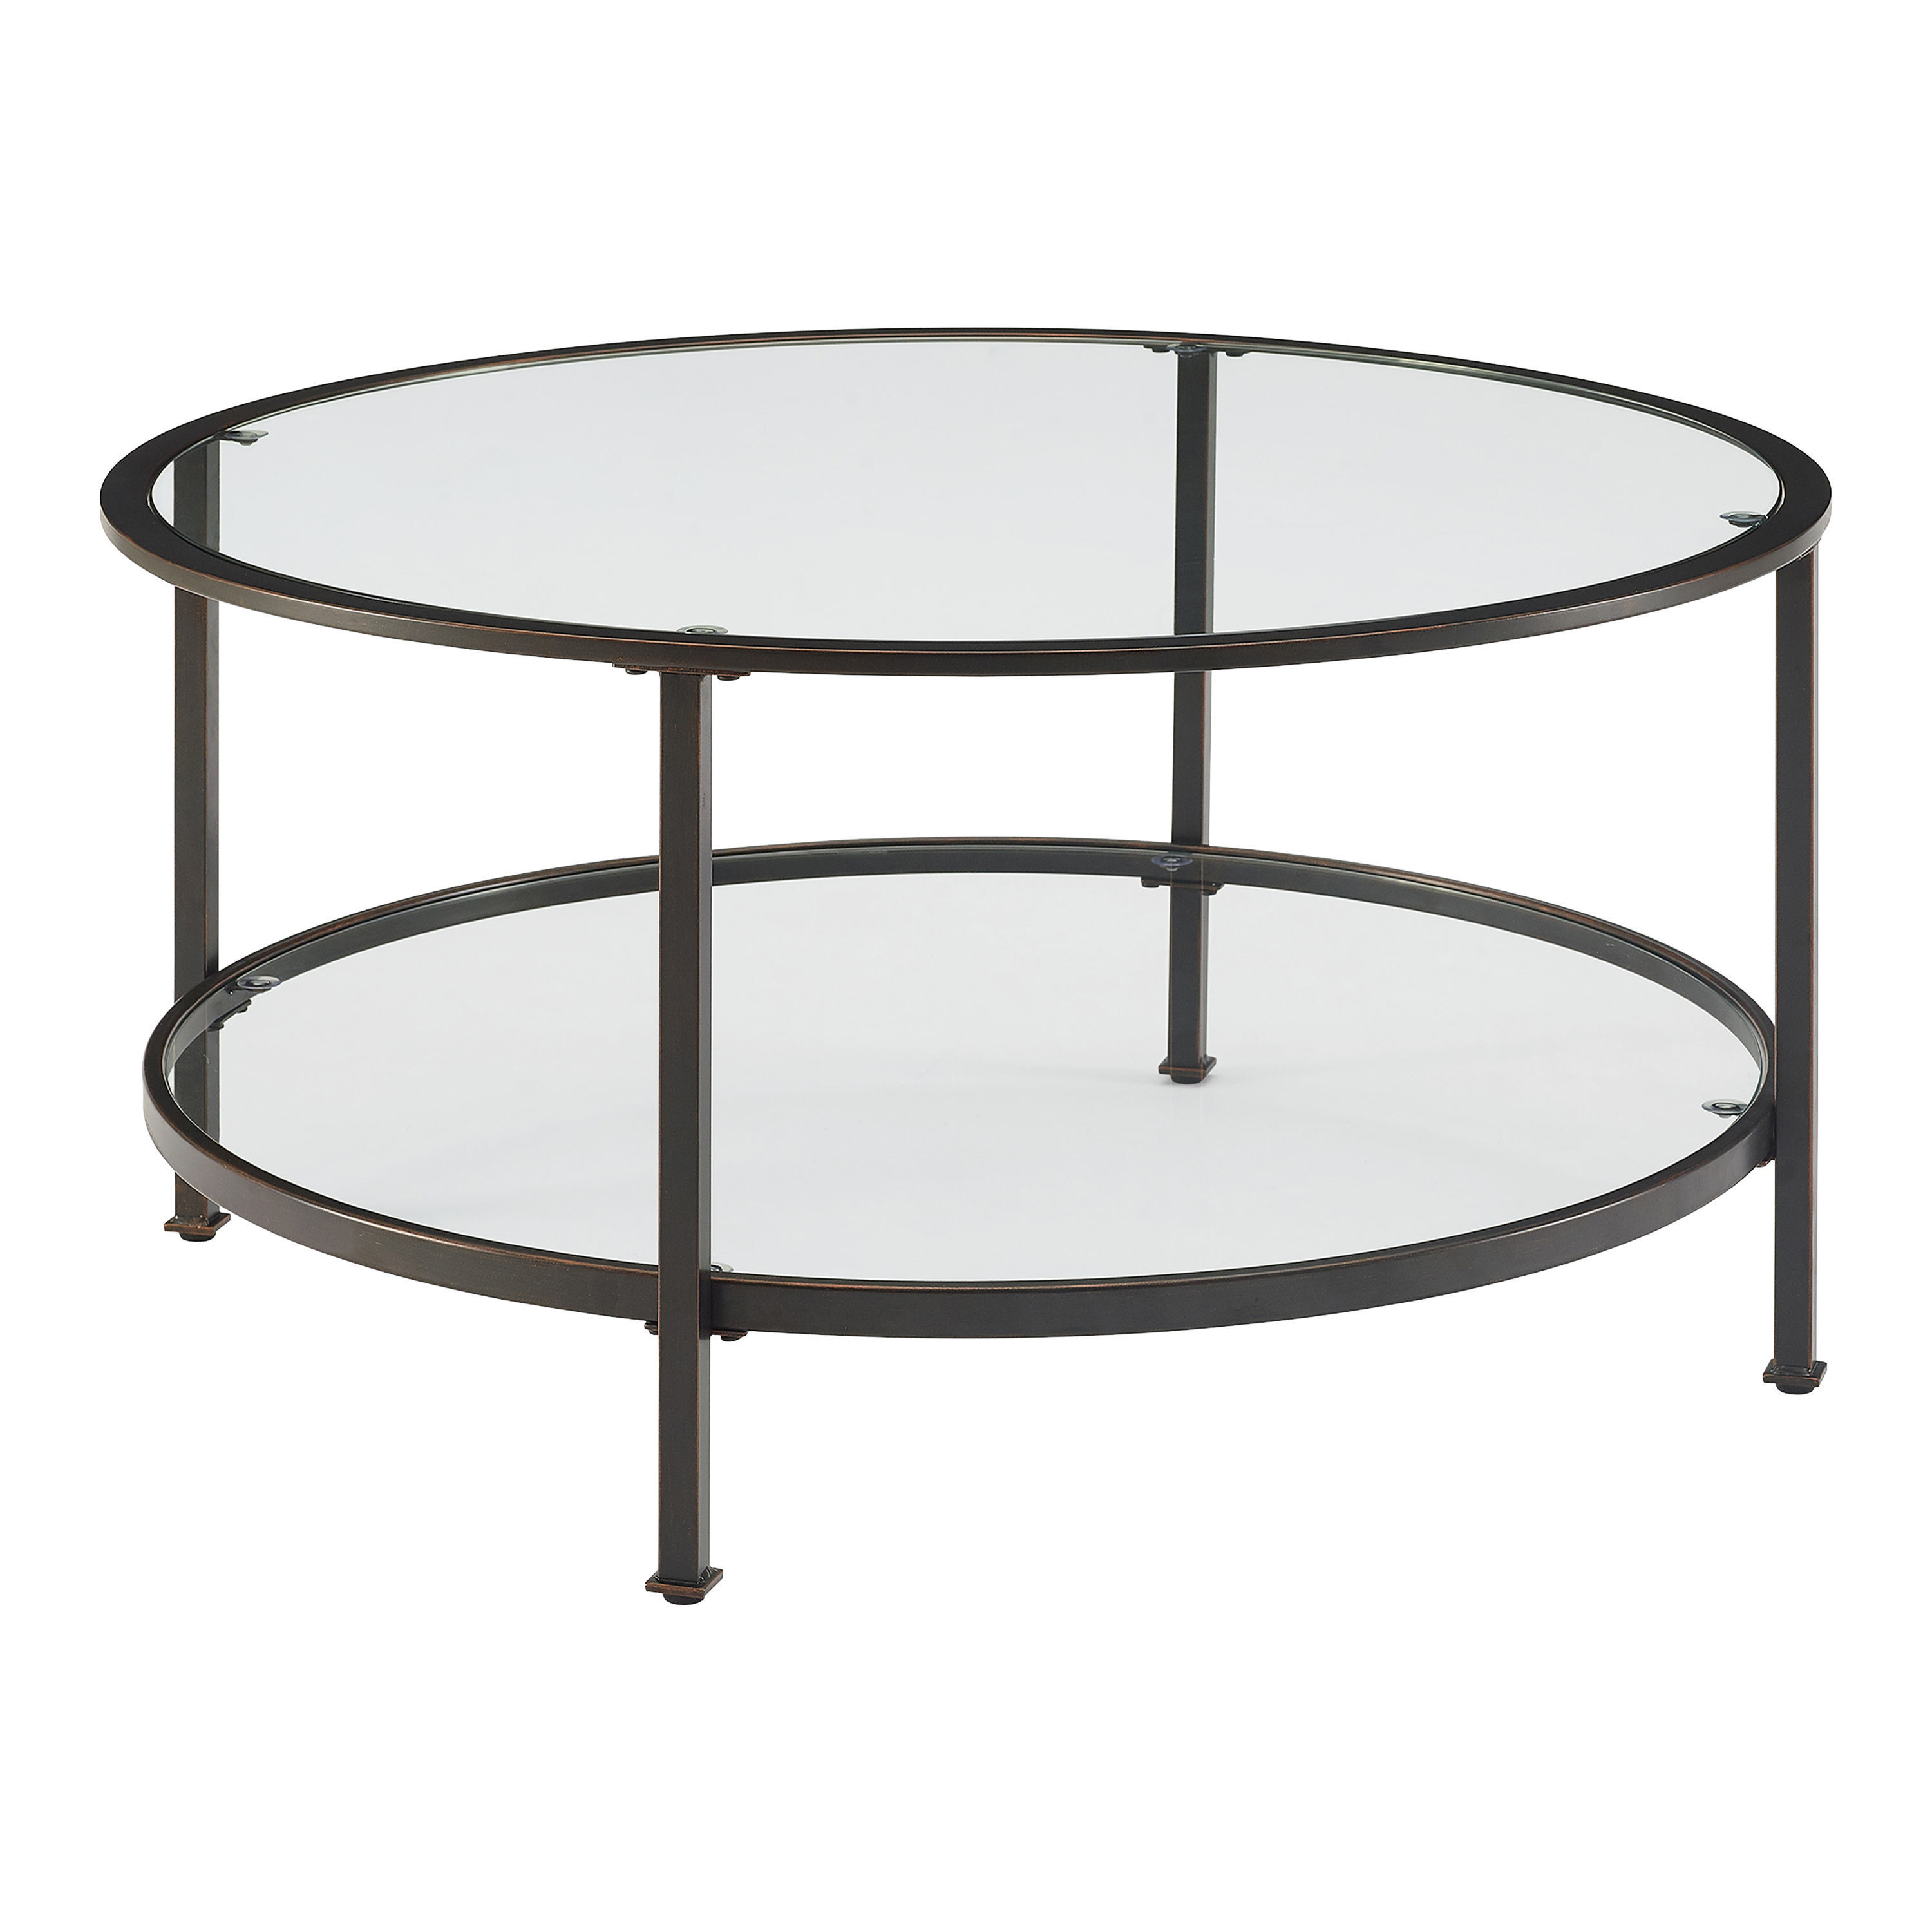 Milayan Round Metal and Glass Coffee Table With Shelf - World Market